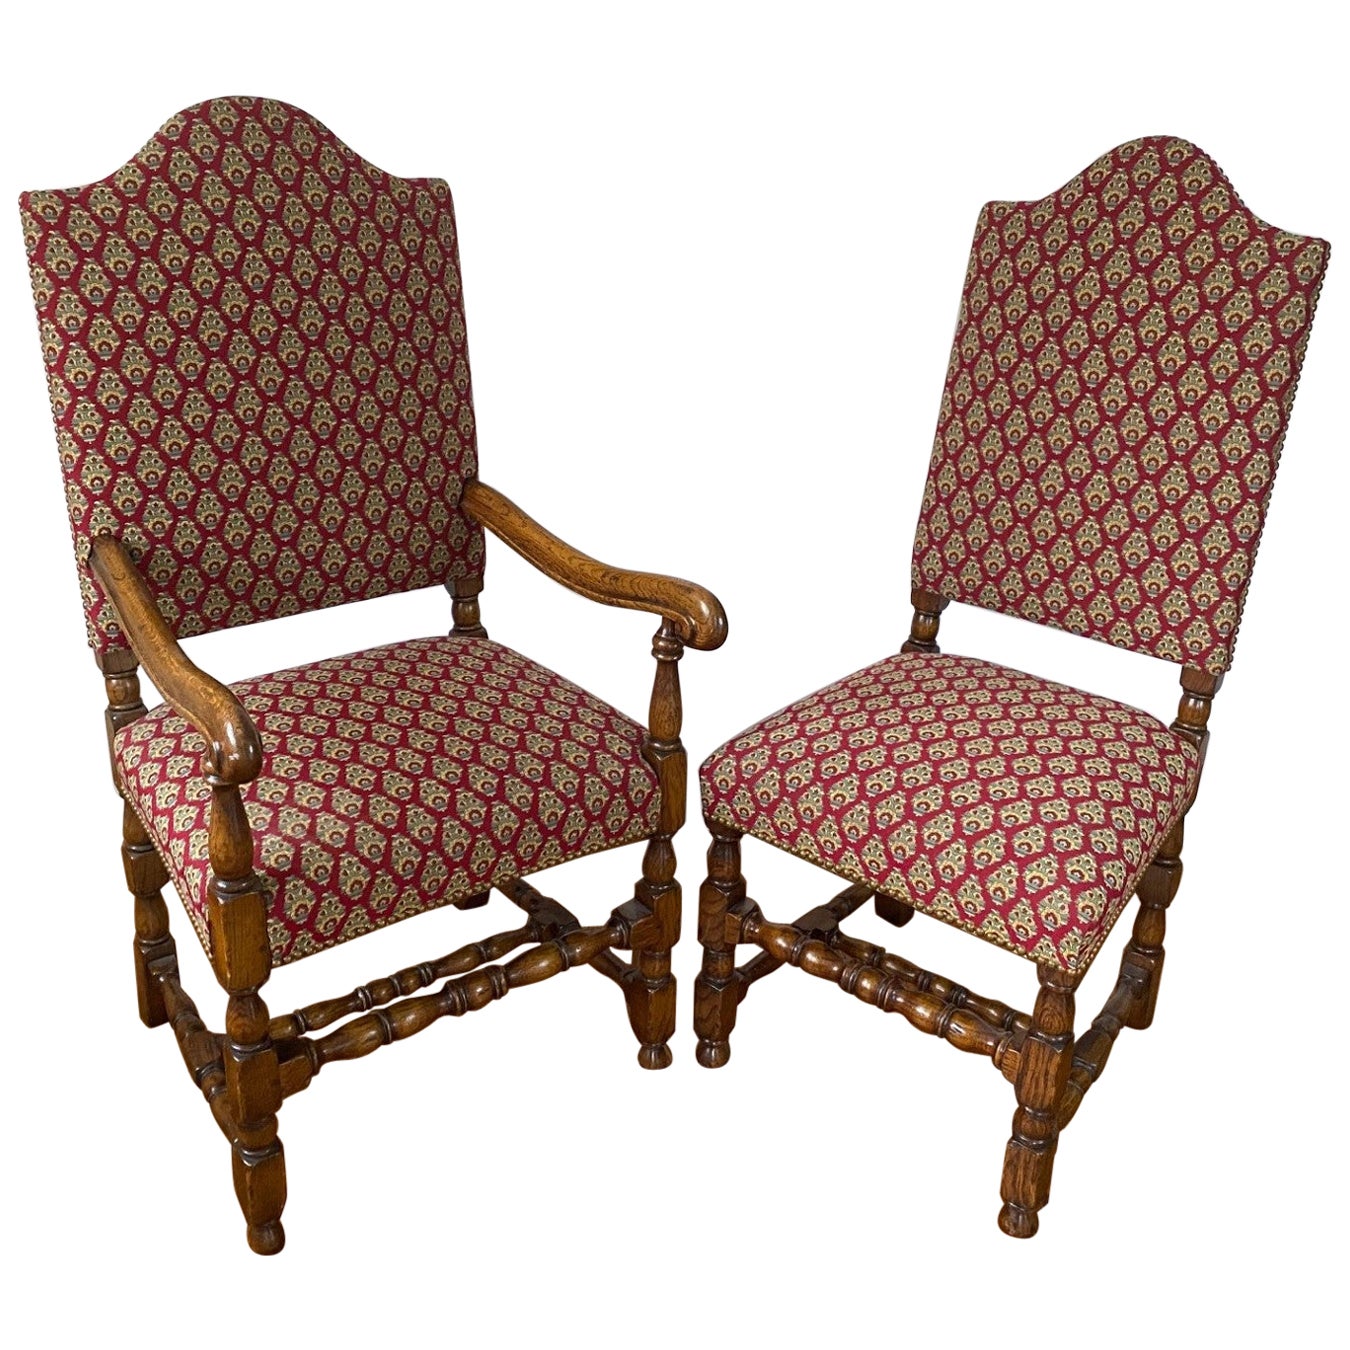 English-Made Late 17th Century Style Solid Oak High Back Side & Arm Chair im Angebot